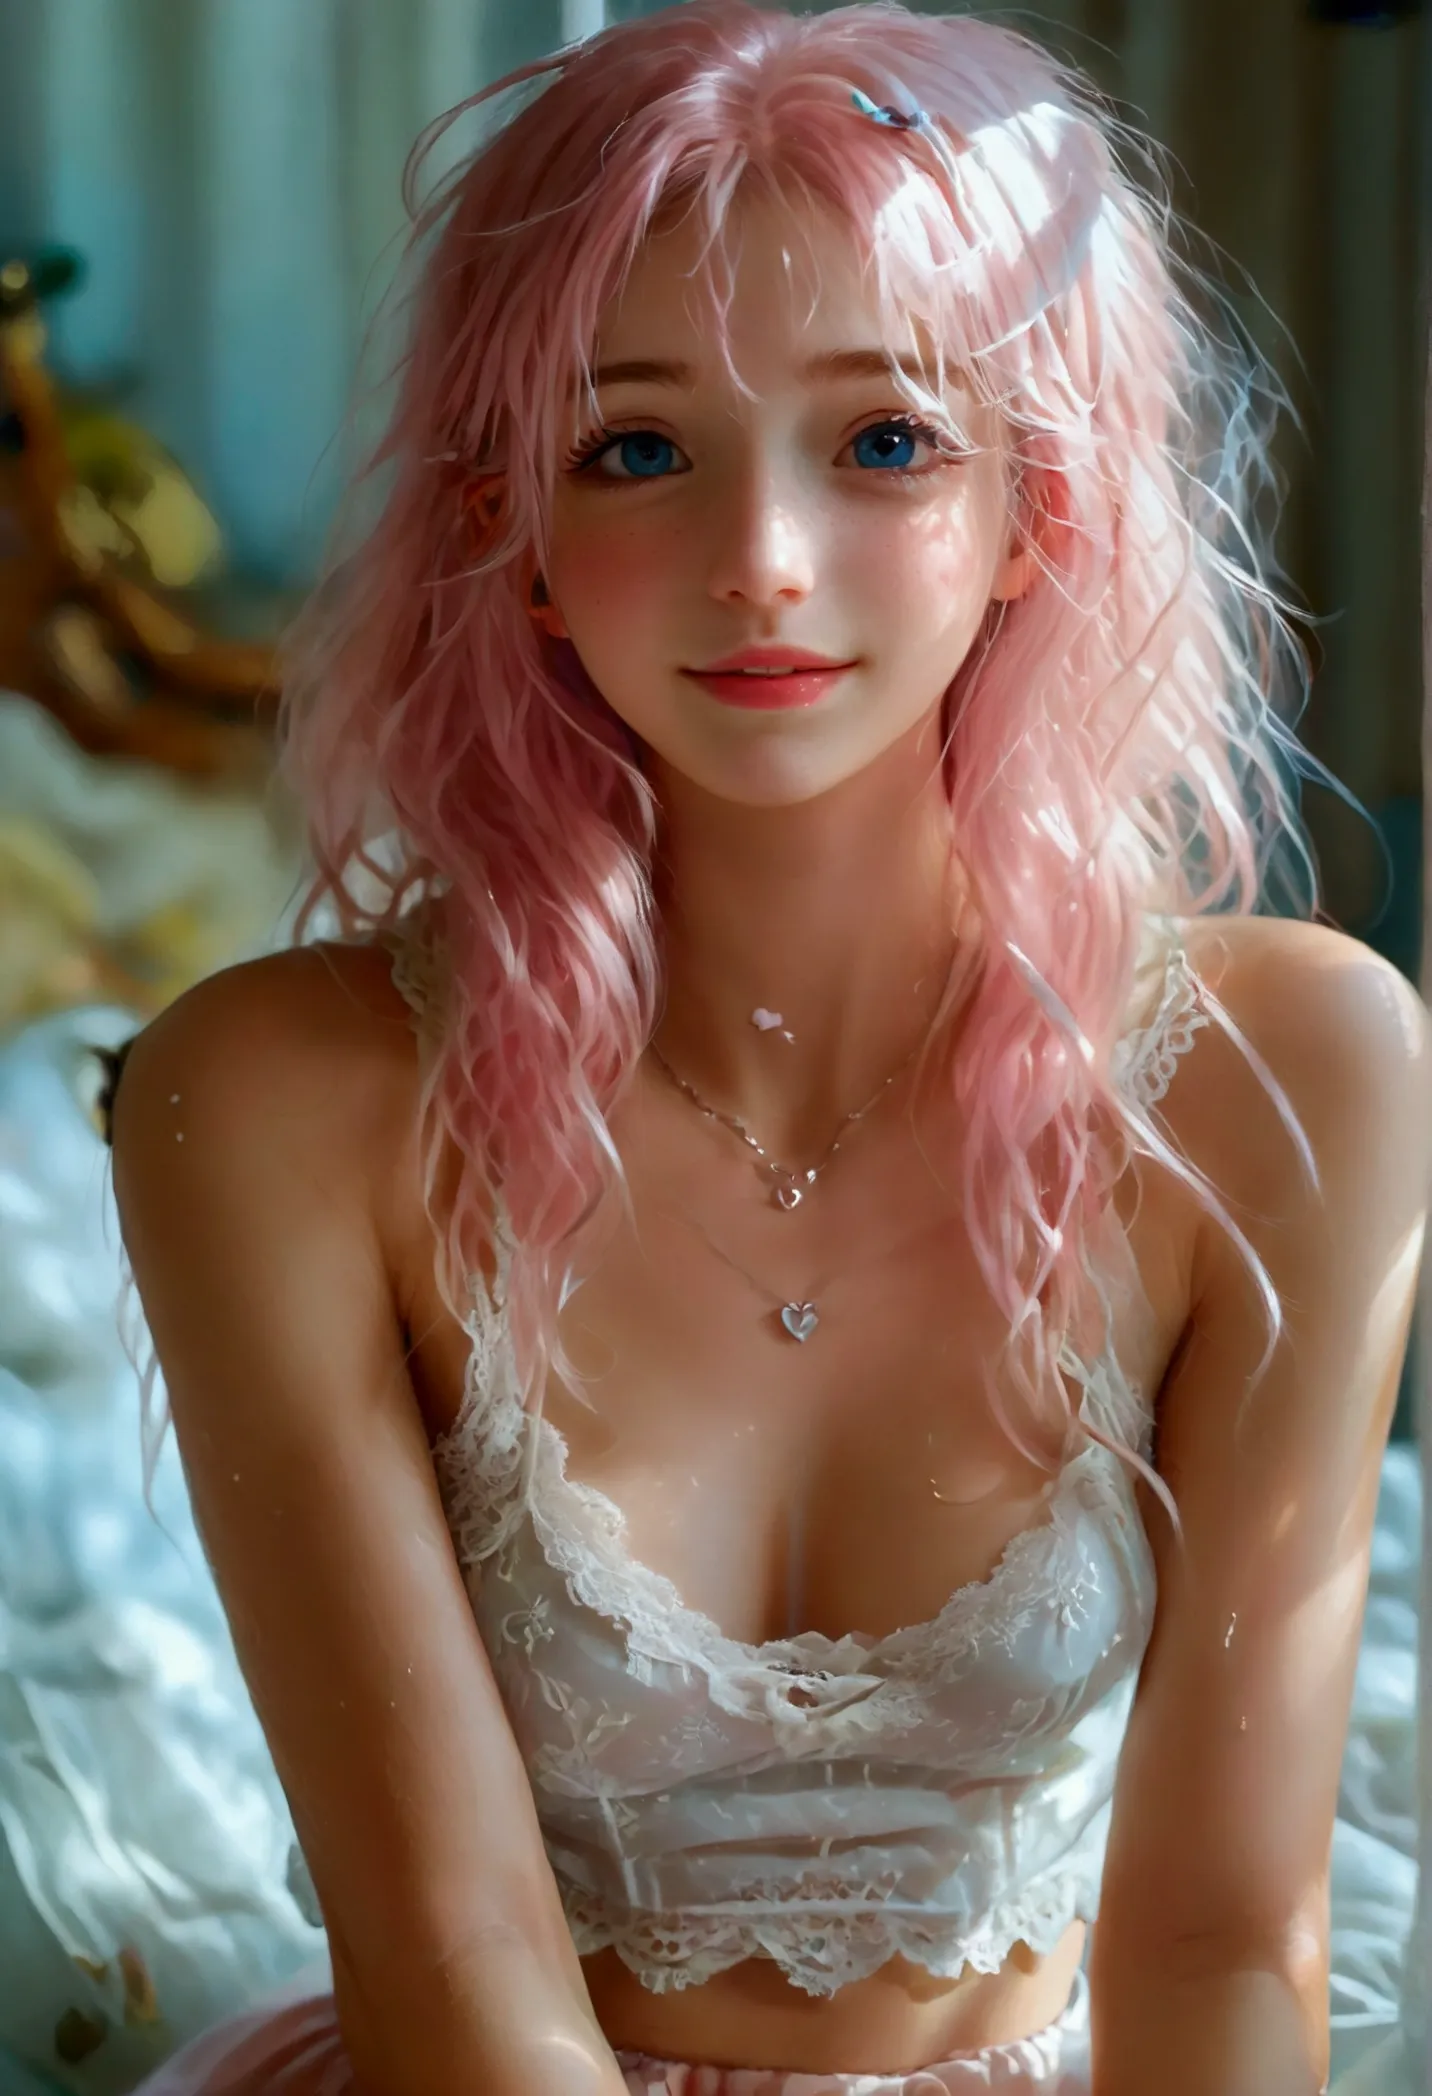 a girl, white skin, young, long pink hair, messy hair, thin arms, small mouth, small nose, small breasts, pink skirt, transparen...